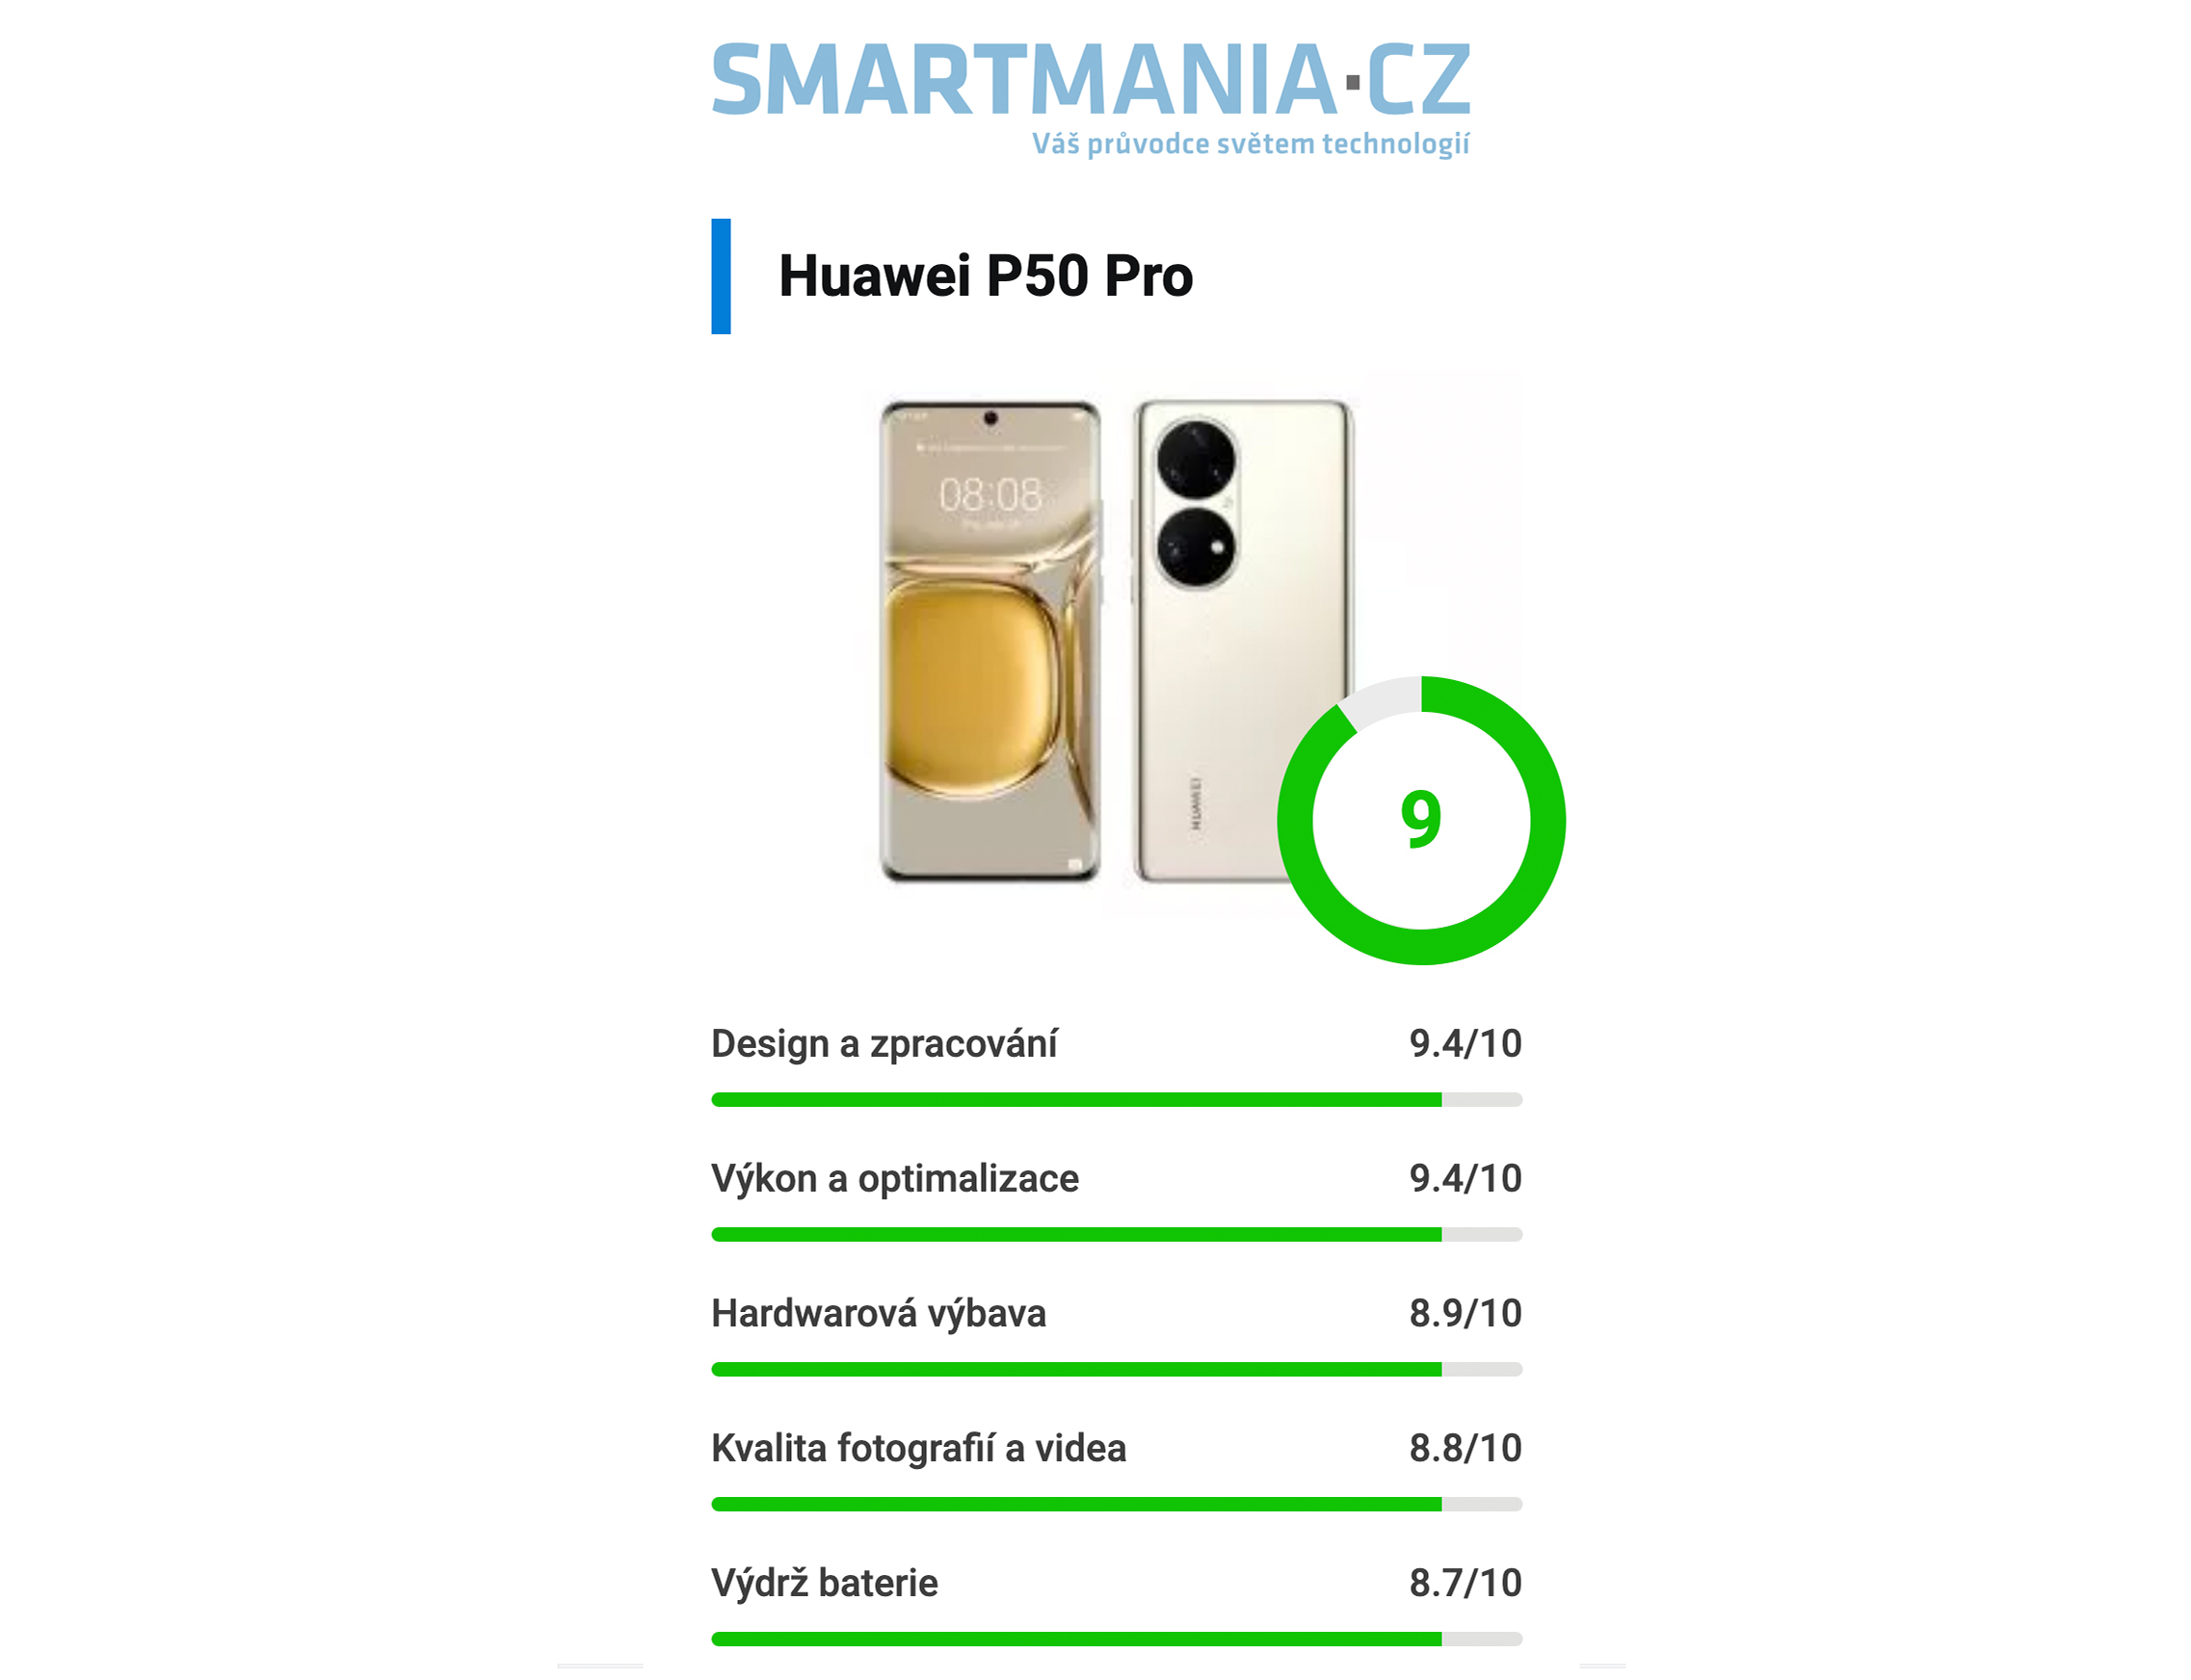 High rating of the P50 Pro on the Smartmania.cz website.